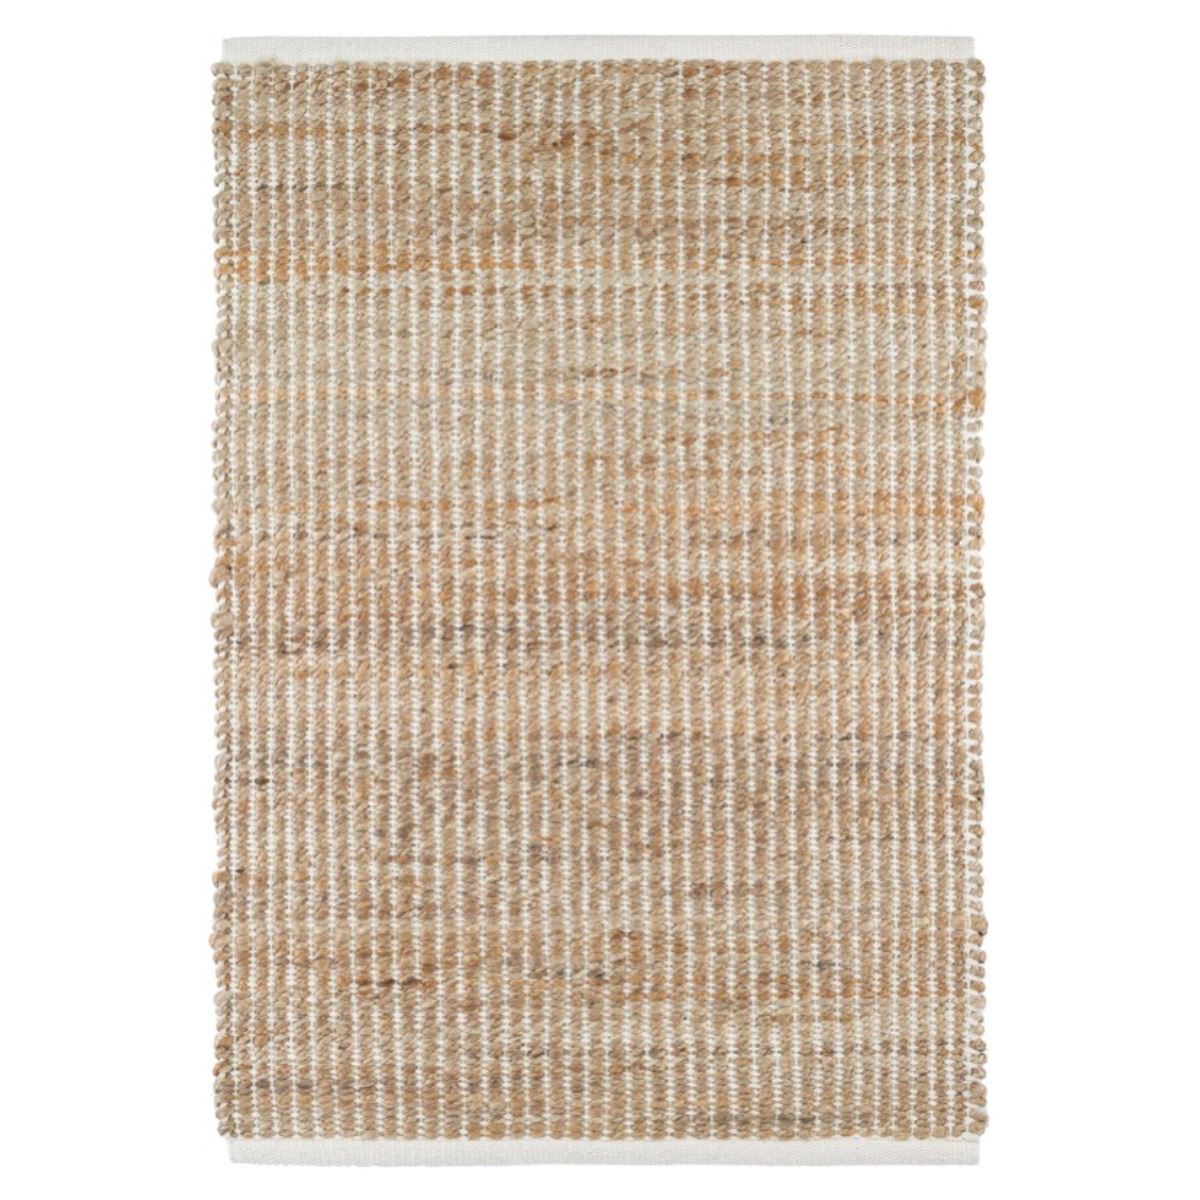 Gridwork Ivory Woven Jute Rug. Top view. 